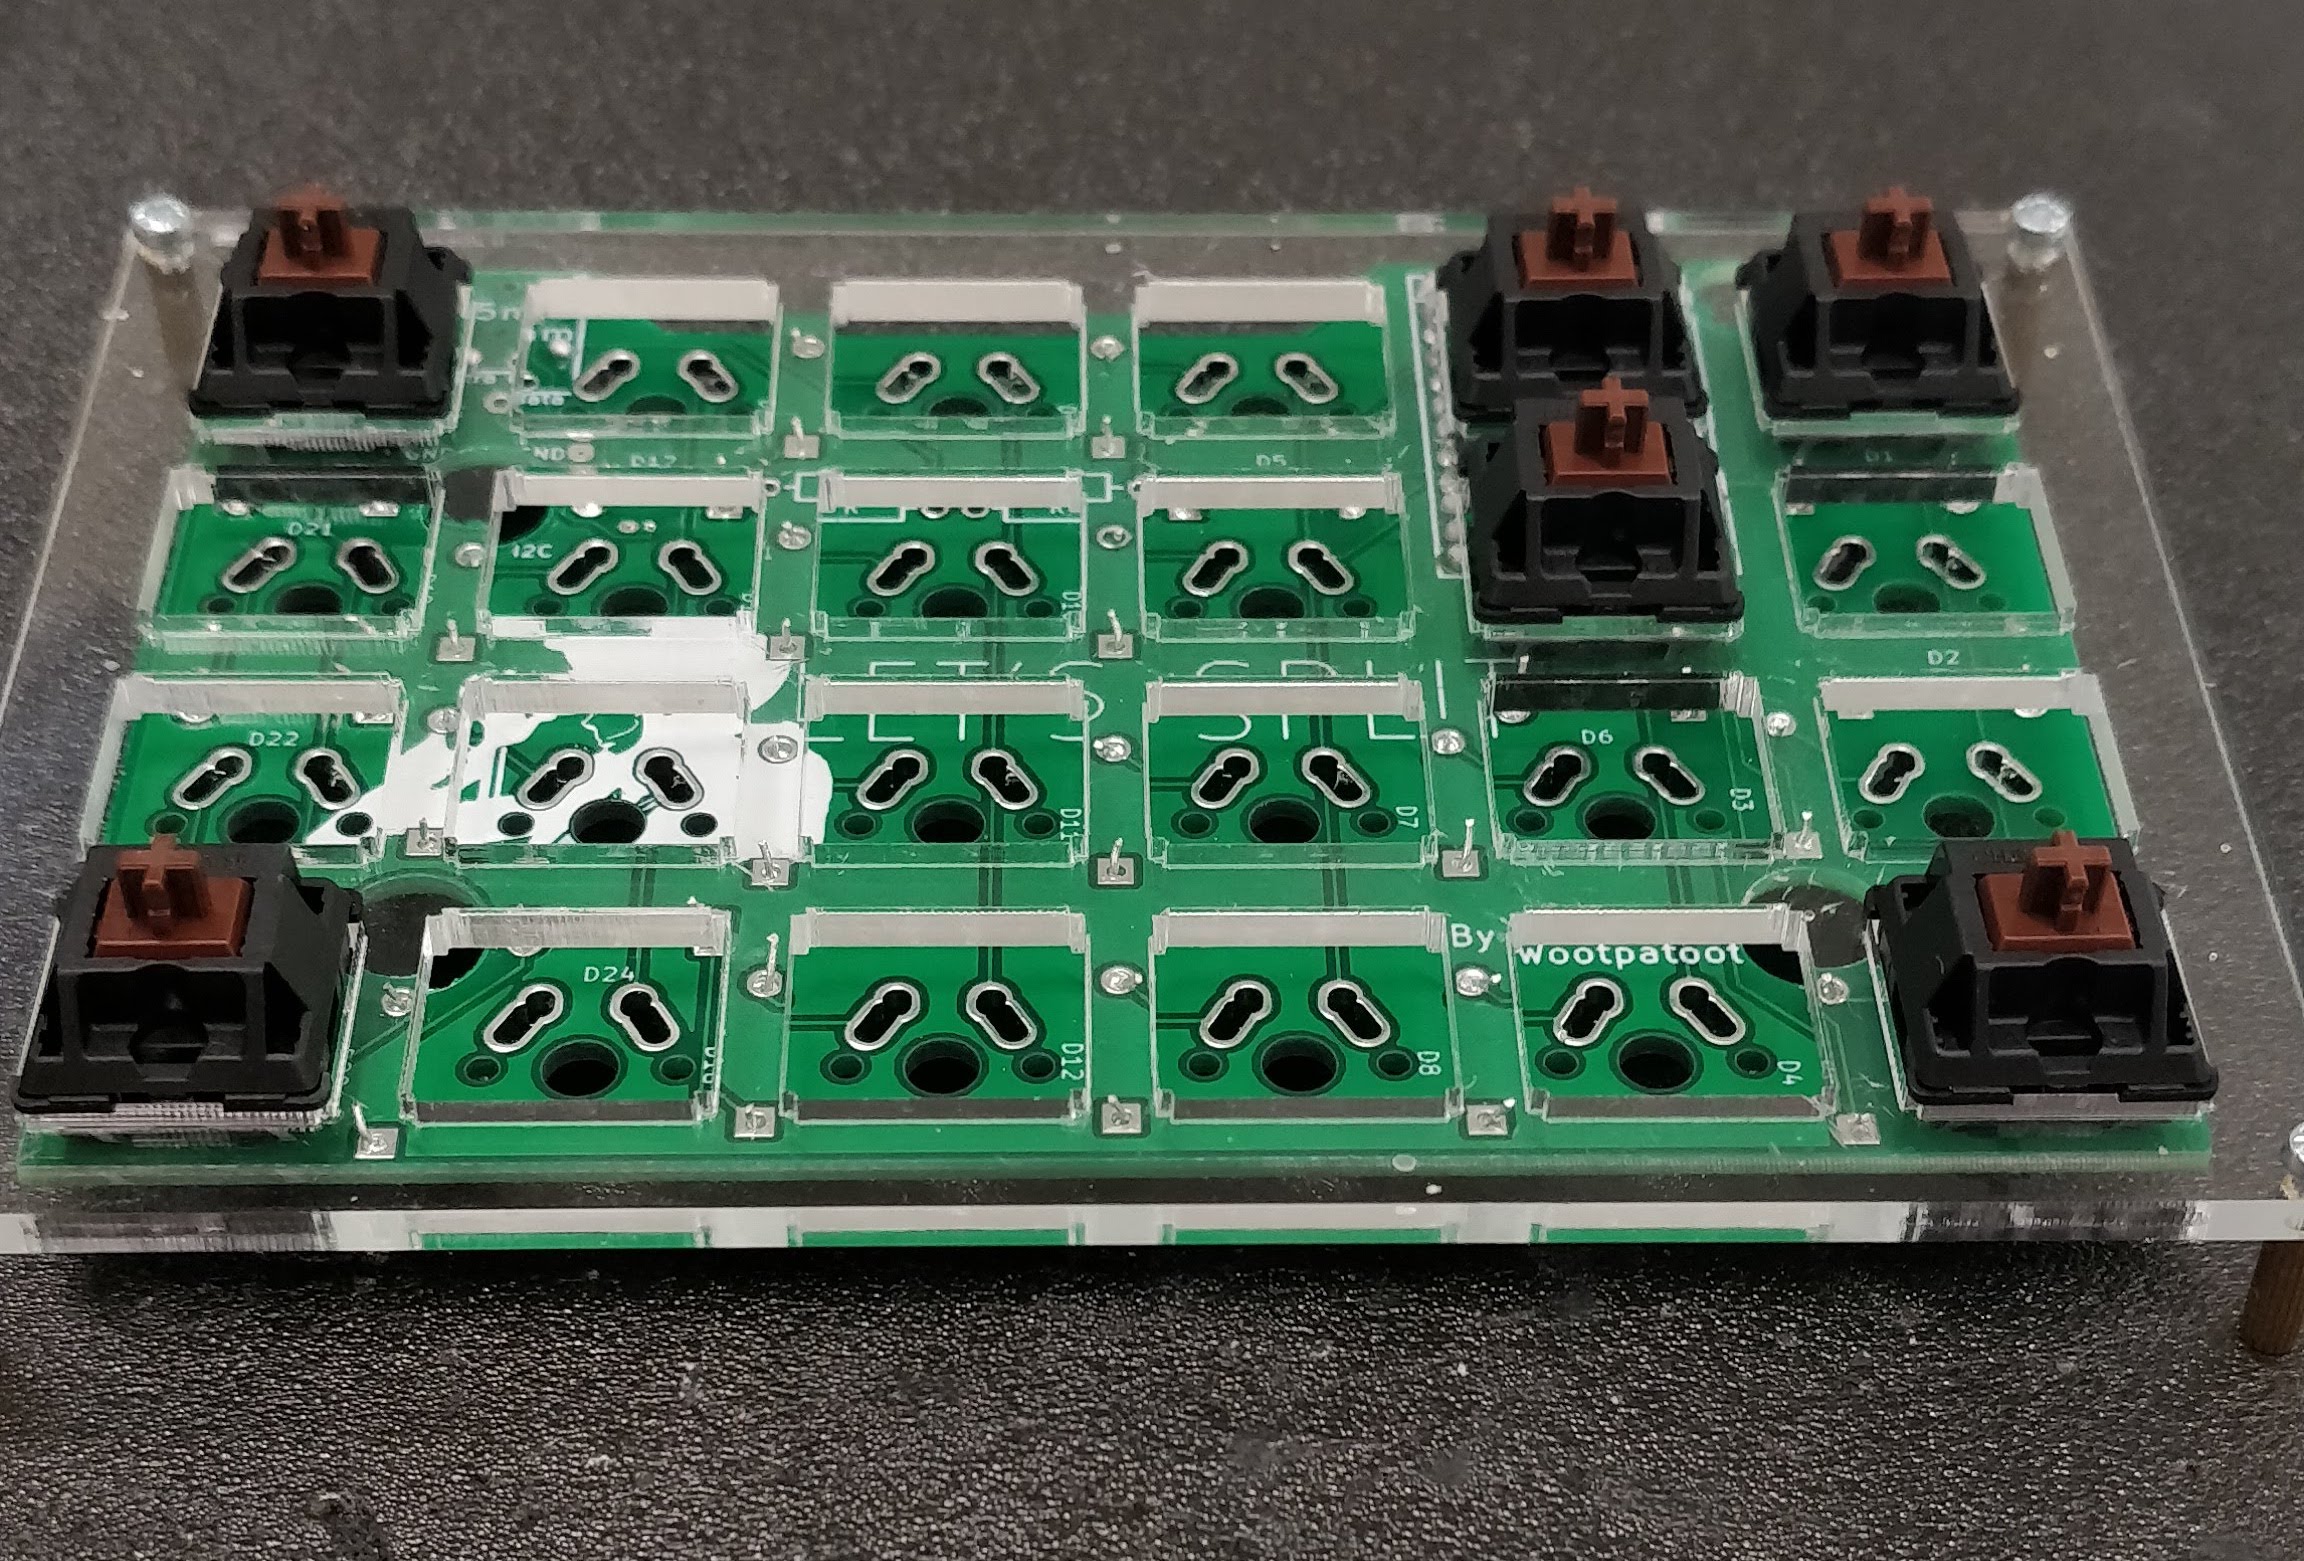 Let's Split - Step 5 - Place the top plate between the switches and solder